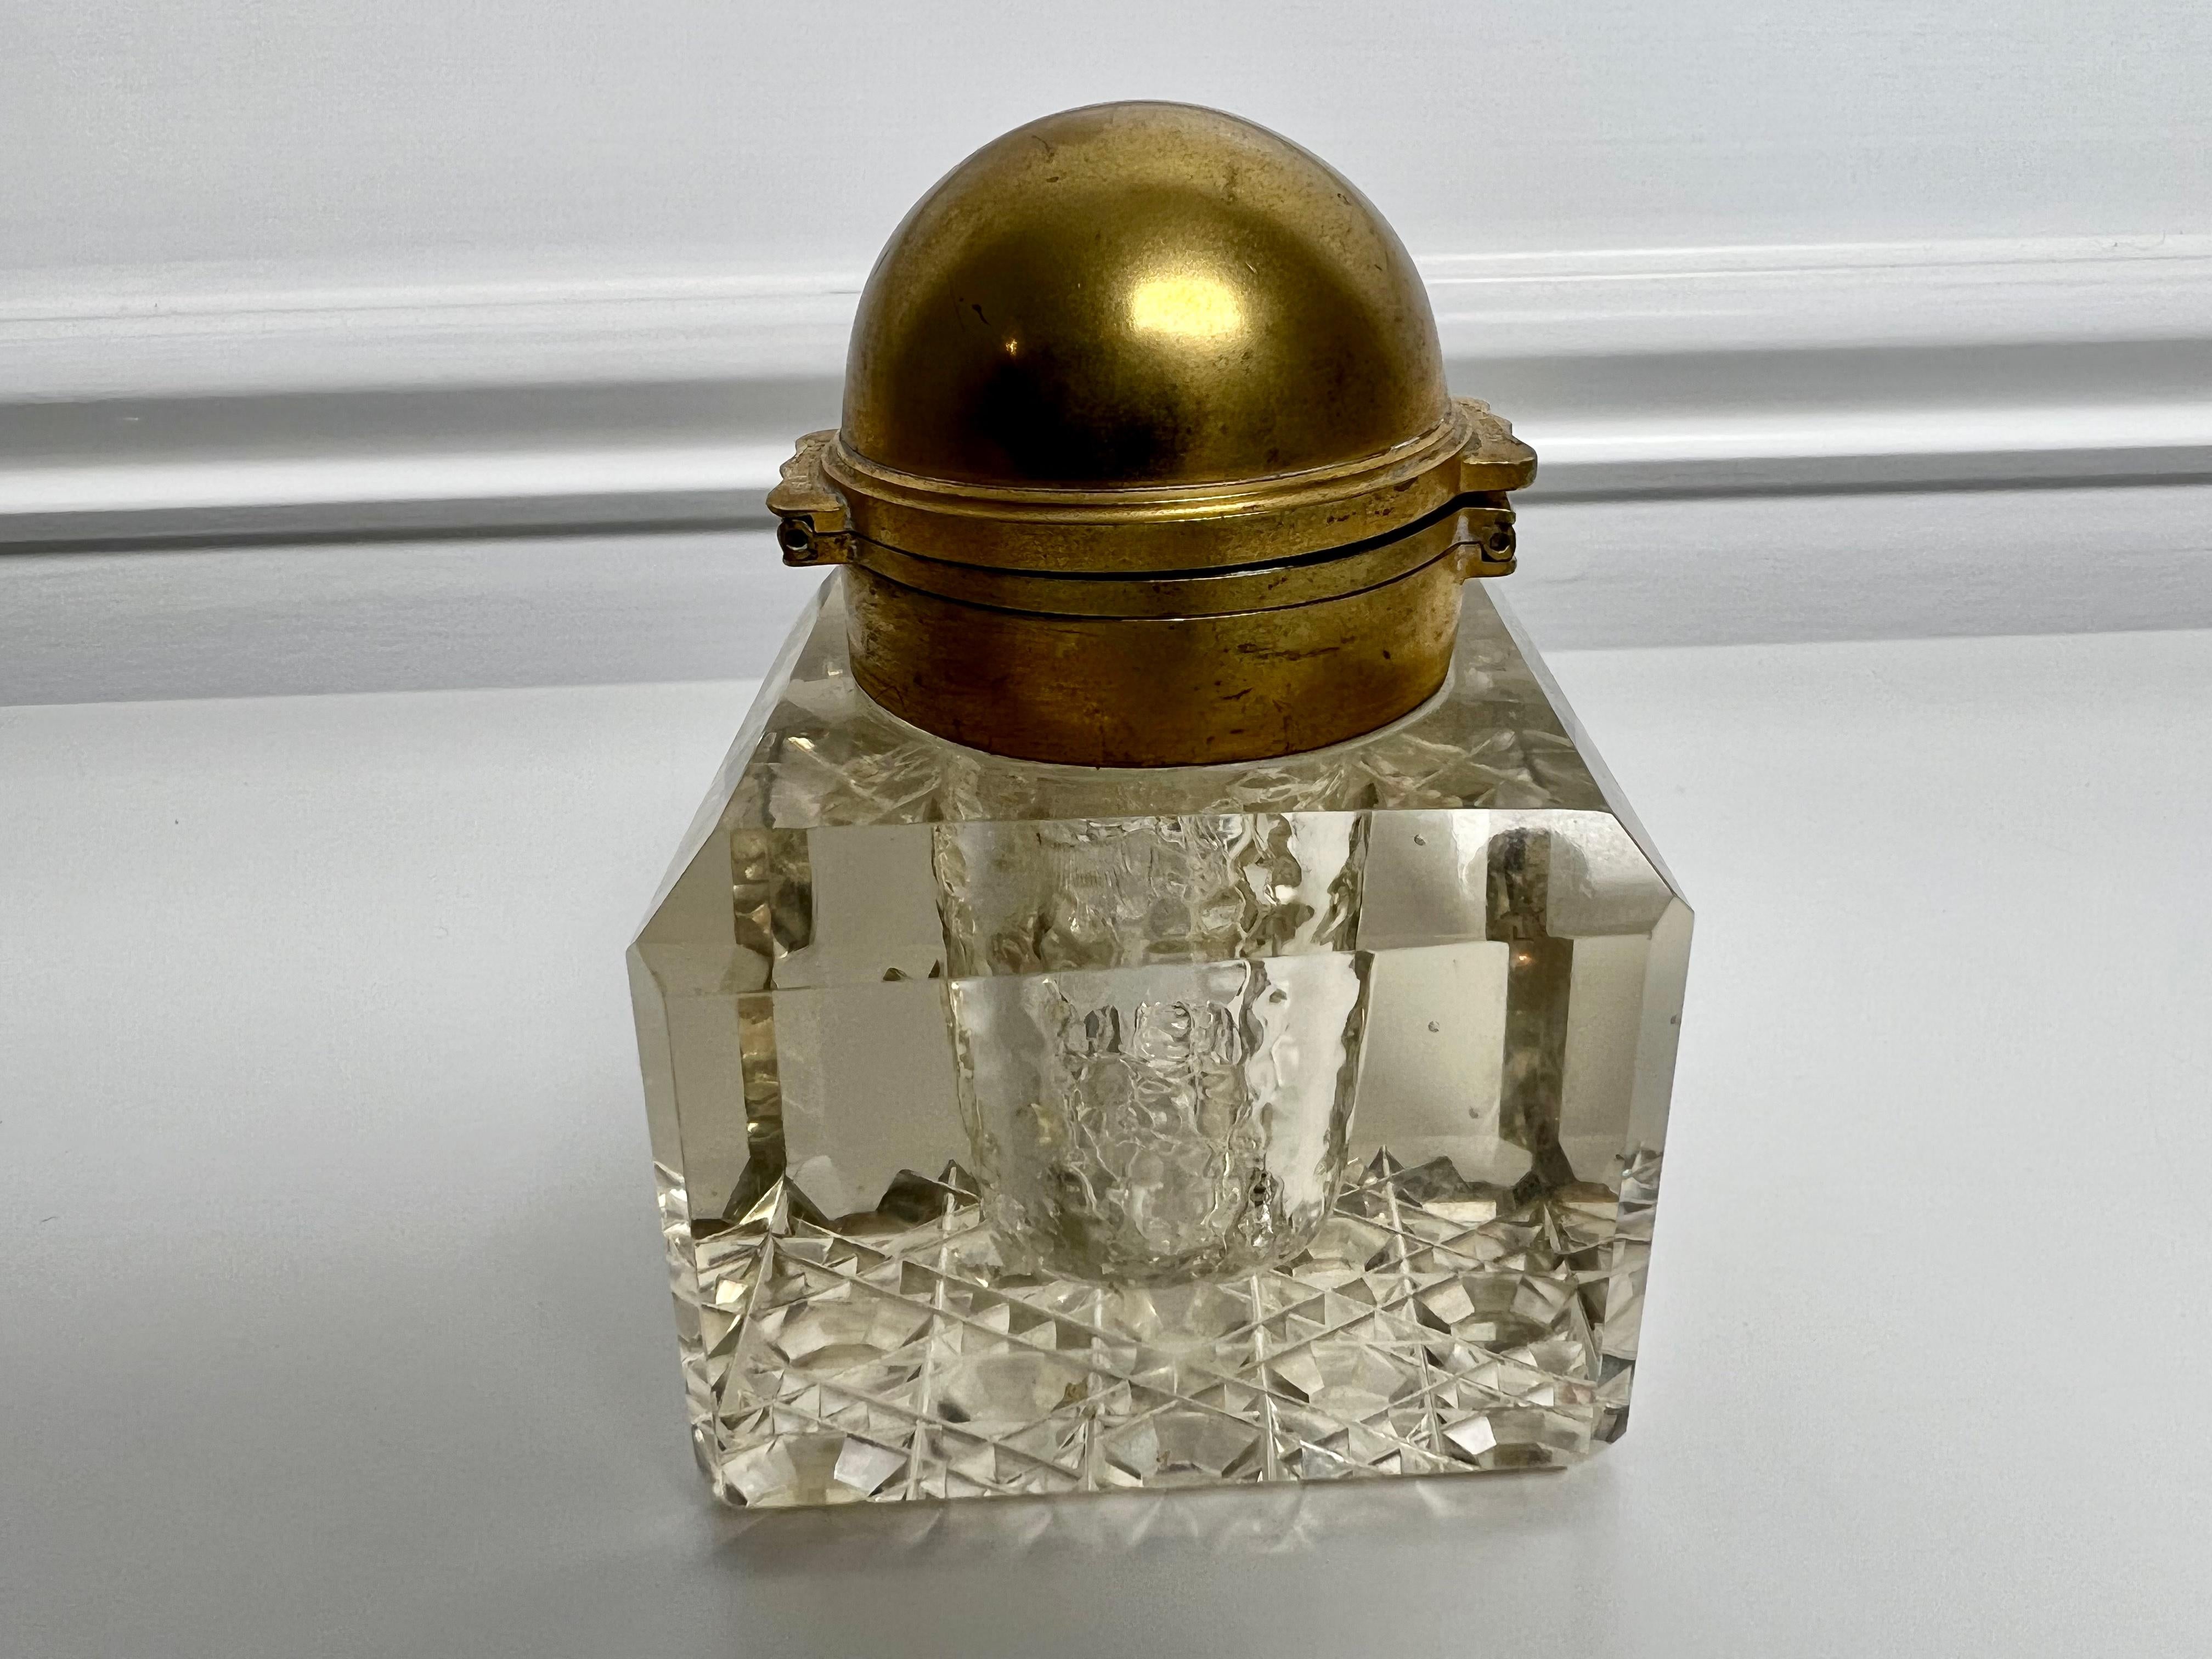 Mid 19th century partner's inkwell with a double opening brass top and a cut crystal daisy bottom. This is a great piece you don't see too many partner's desk inkwells and in good condition. The top is hinged on both sides which lets you open it